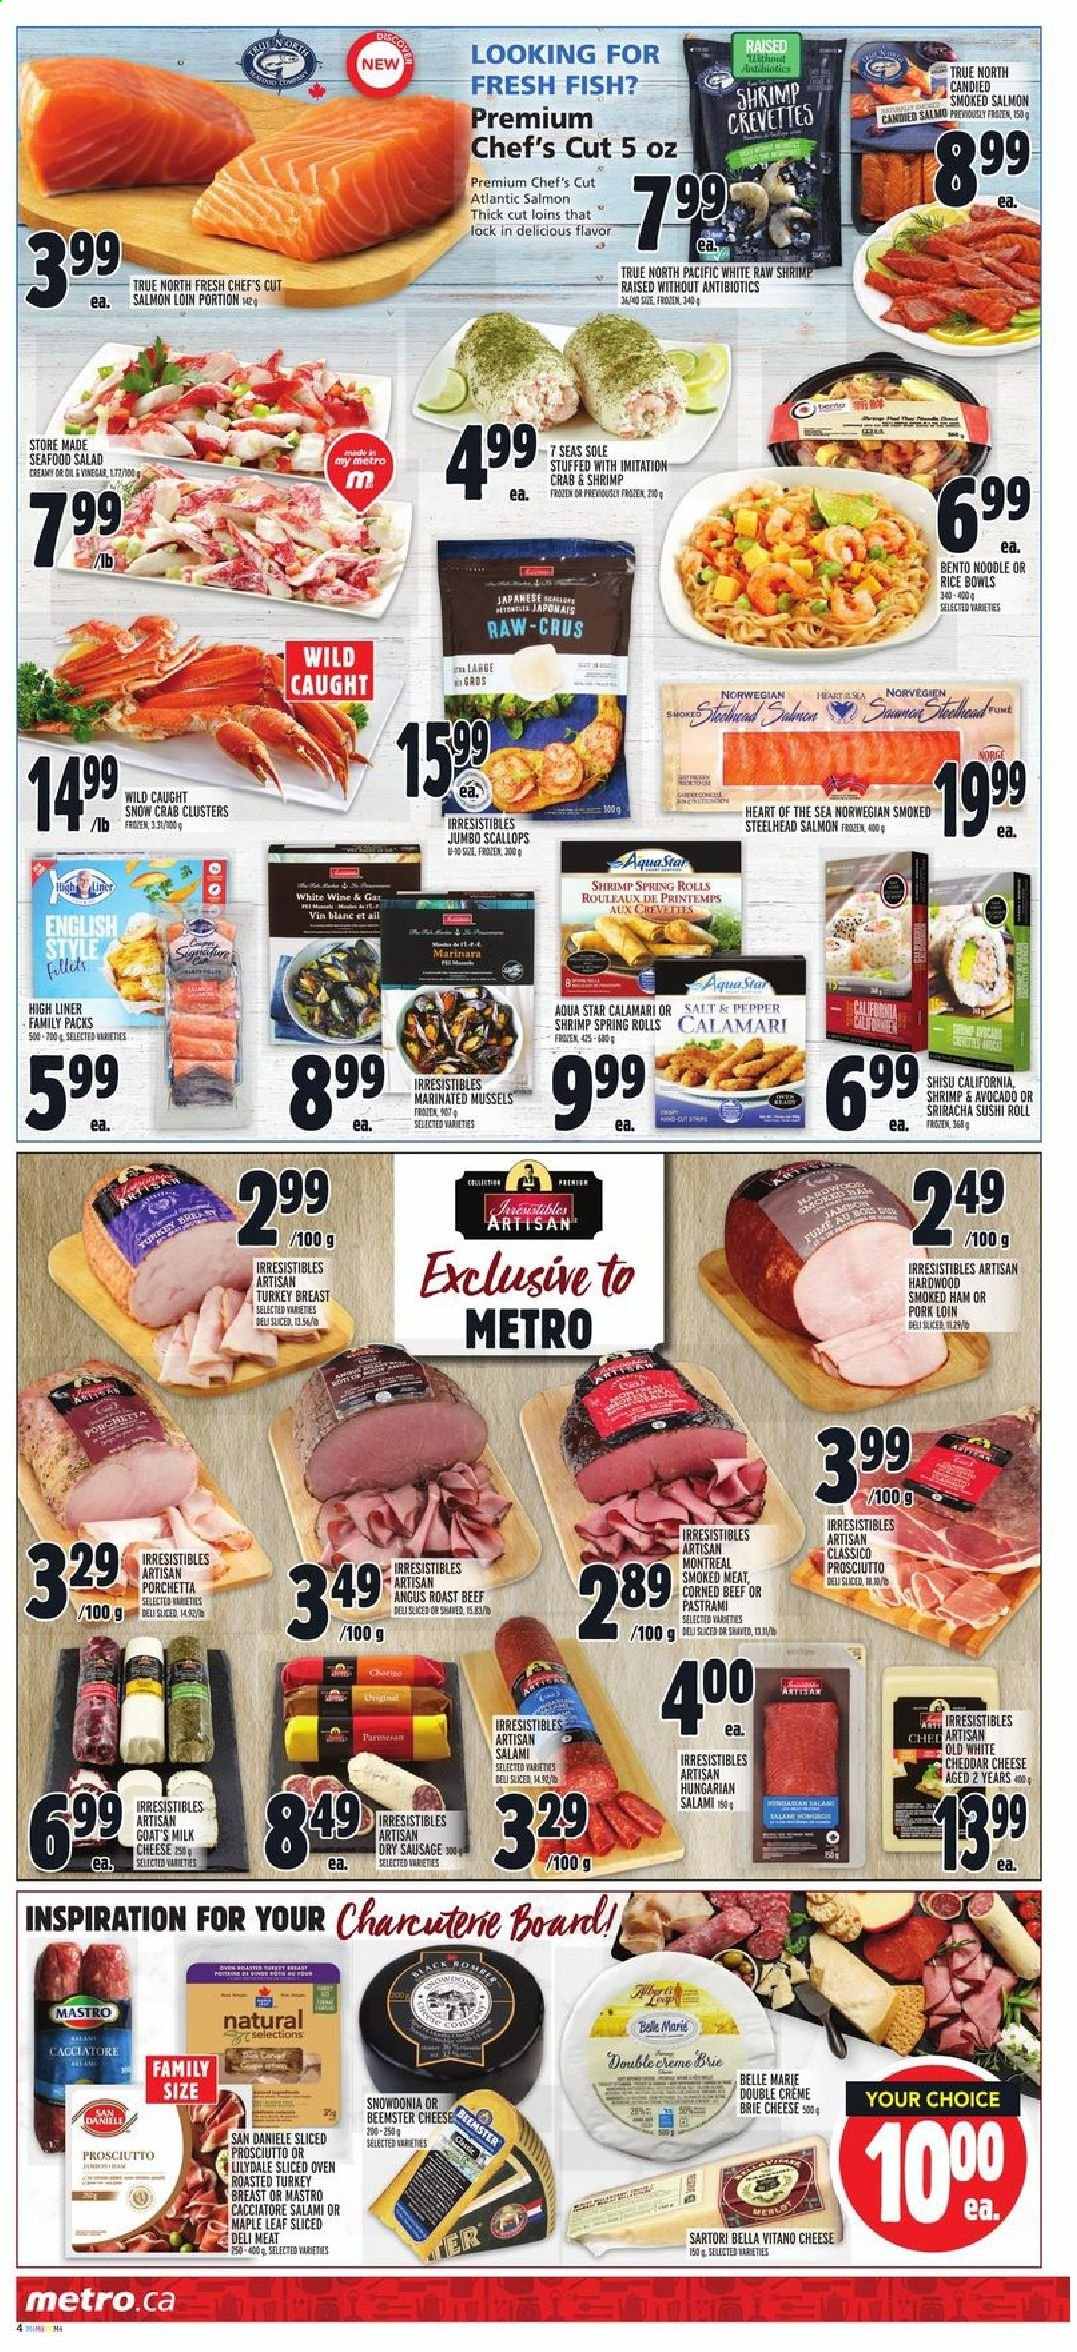 thumbnail - Metro Flyer - April 15, 2021 - April 21, 2021 - Sales products - salad, calamari, mussels, salmon, scallops, smoked salmon, seafood, crab, fish, shrimps, spring rolls, noodles, salami, ham, prosciutto, pastrami, smoked ham, sausage, seafood salad, corned beef, cheddar, cheese, brie, BellaVitano, milk, rice, sriracha, Classico, white wine, turkey, beef meat, pork loin, pork meat. Page 5.